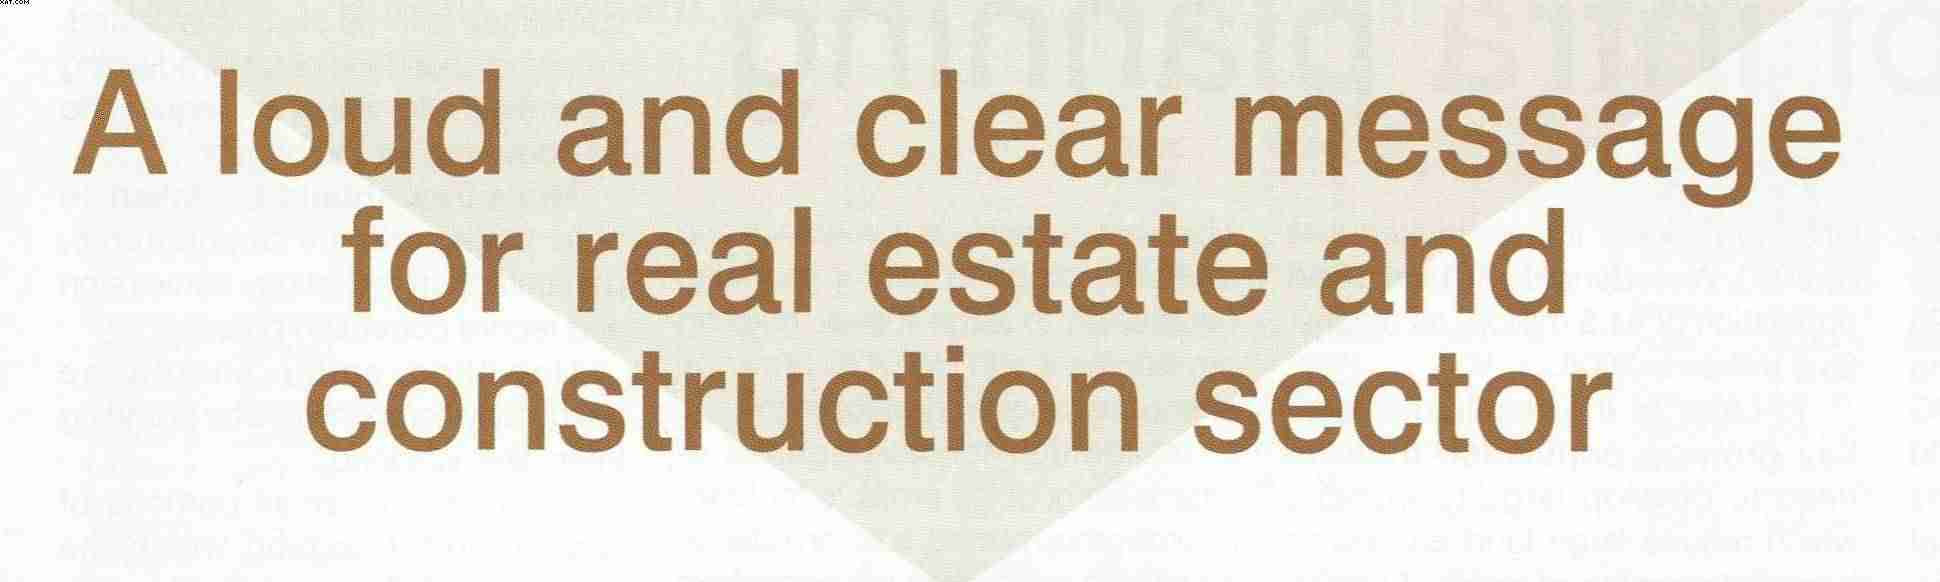 A loud and clear message for real estate and construction sector